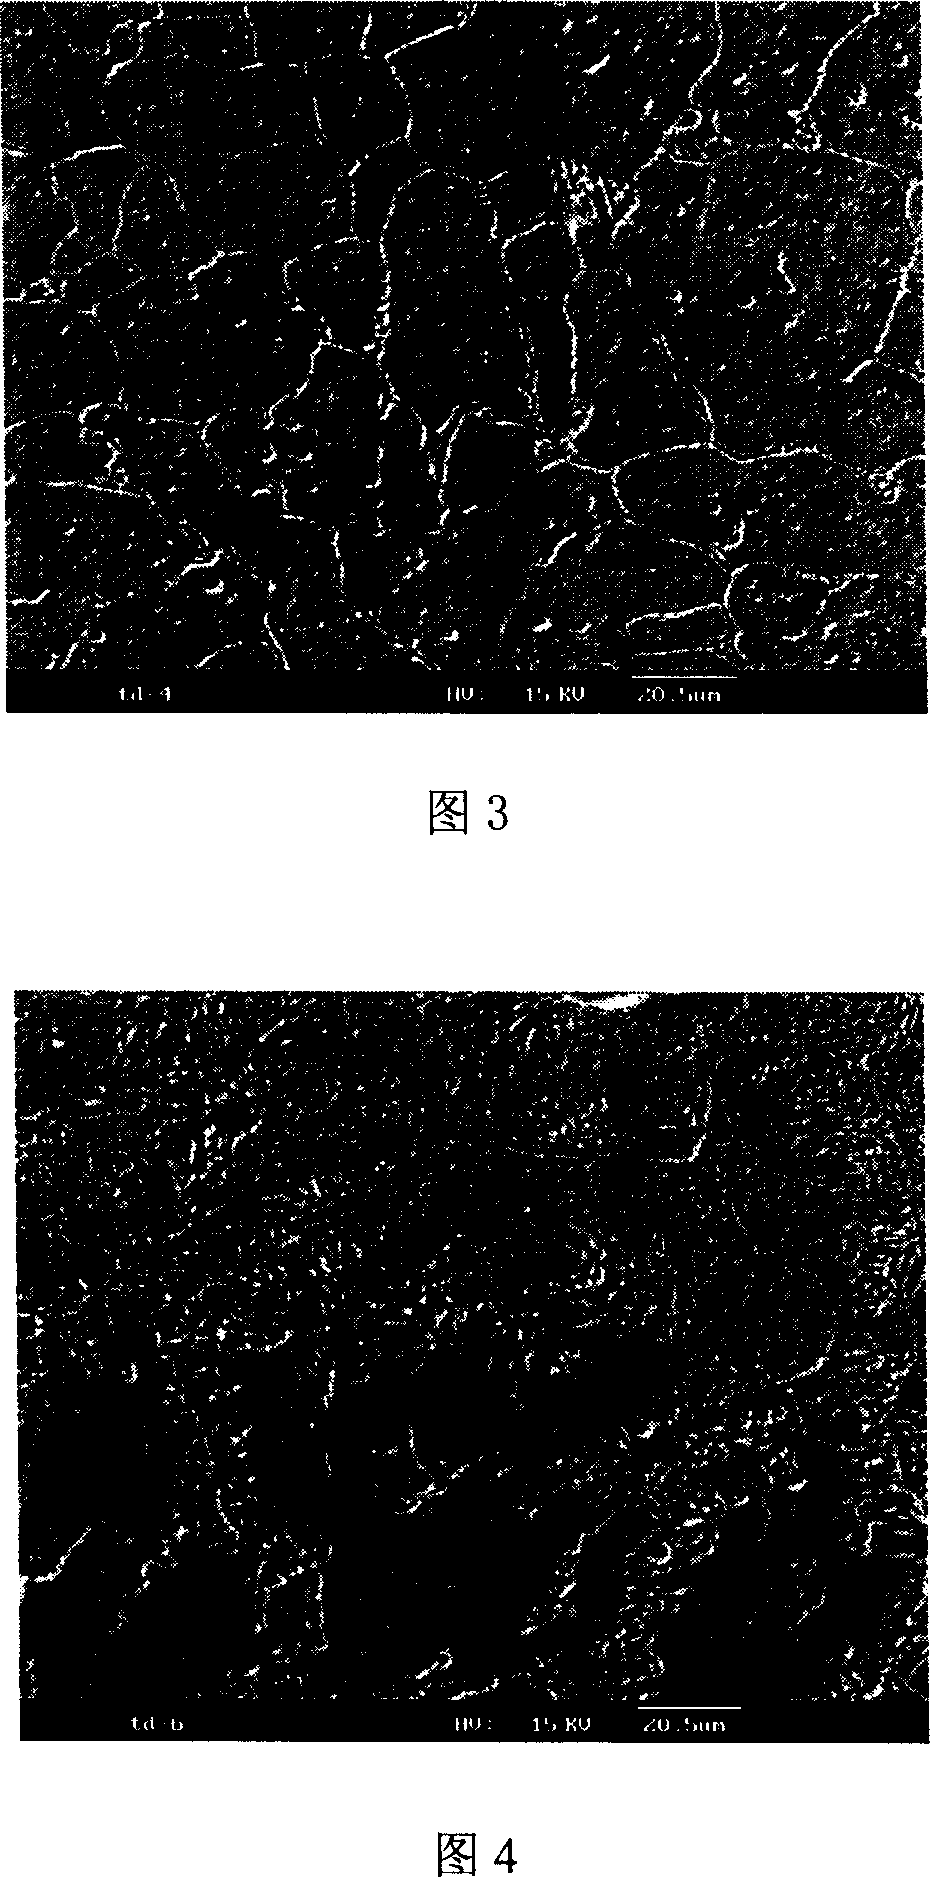 NbTiAl series laminate structure intermetallic compound composite material and its preparation method